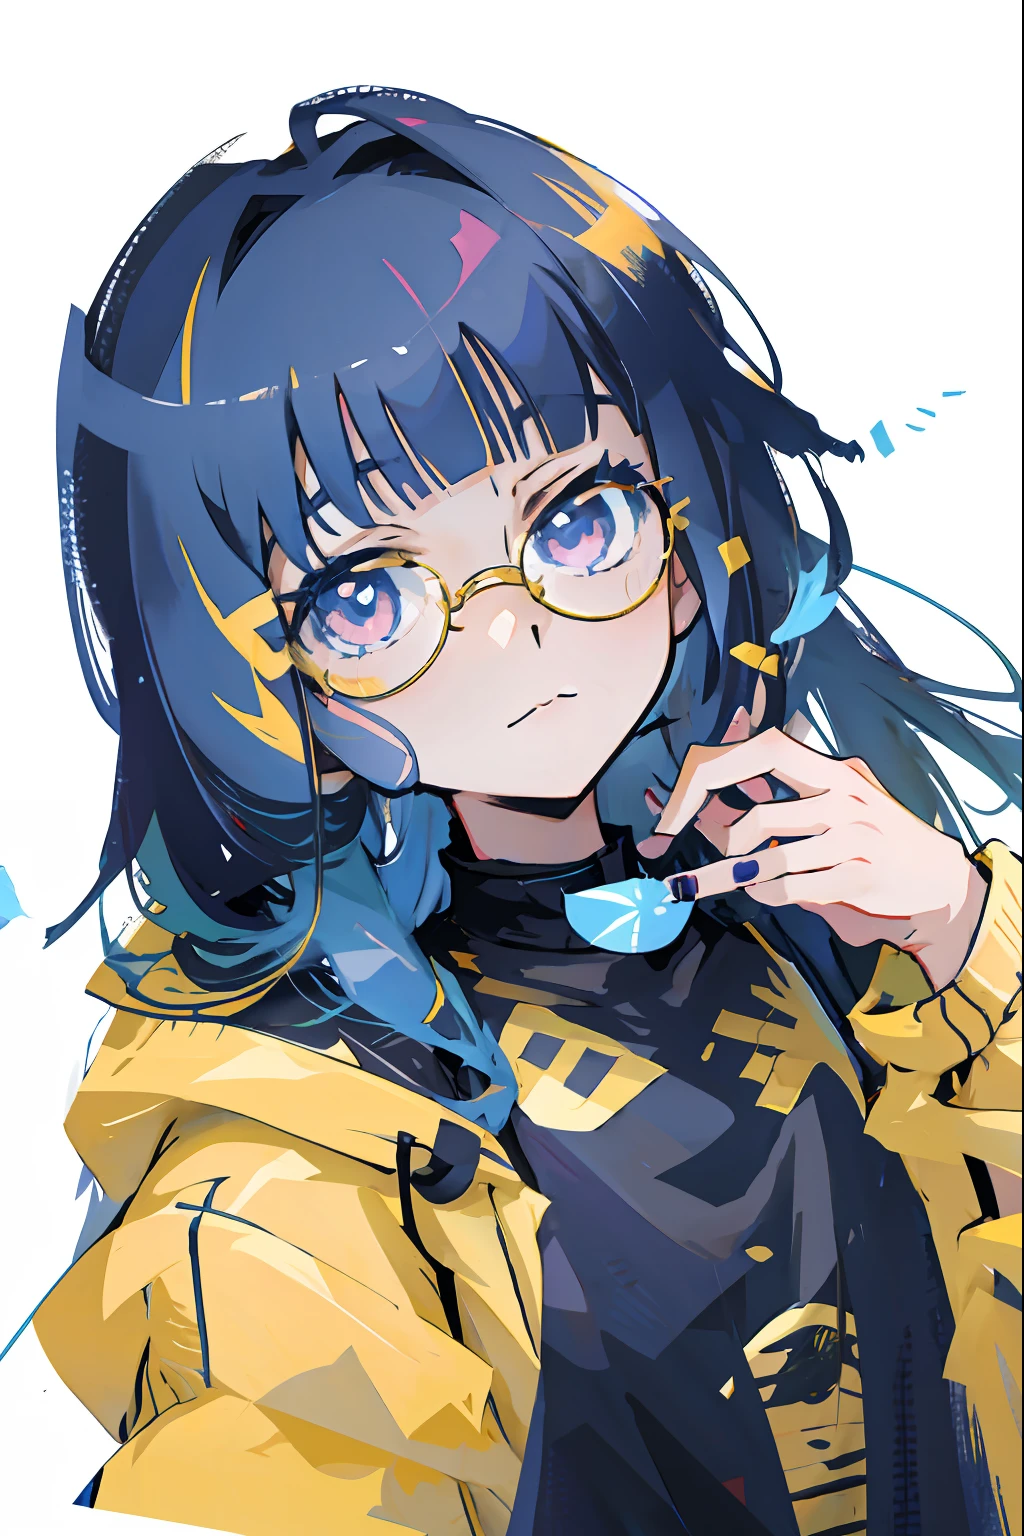 Anime girl with glasses and yellow jacket, Anime moe art style, 2 d anime style, unknown artstyle, Anime art style, in an anime style, High quality anime art style, Anime style. 8K, style of anime4 K, In anime style, Marin Kitagawa fanart, Anime style portrait, style of anime, Anime art style